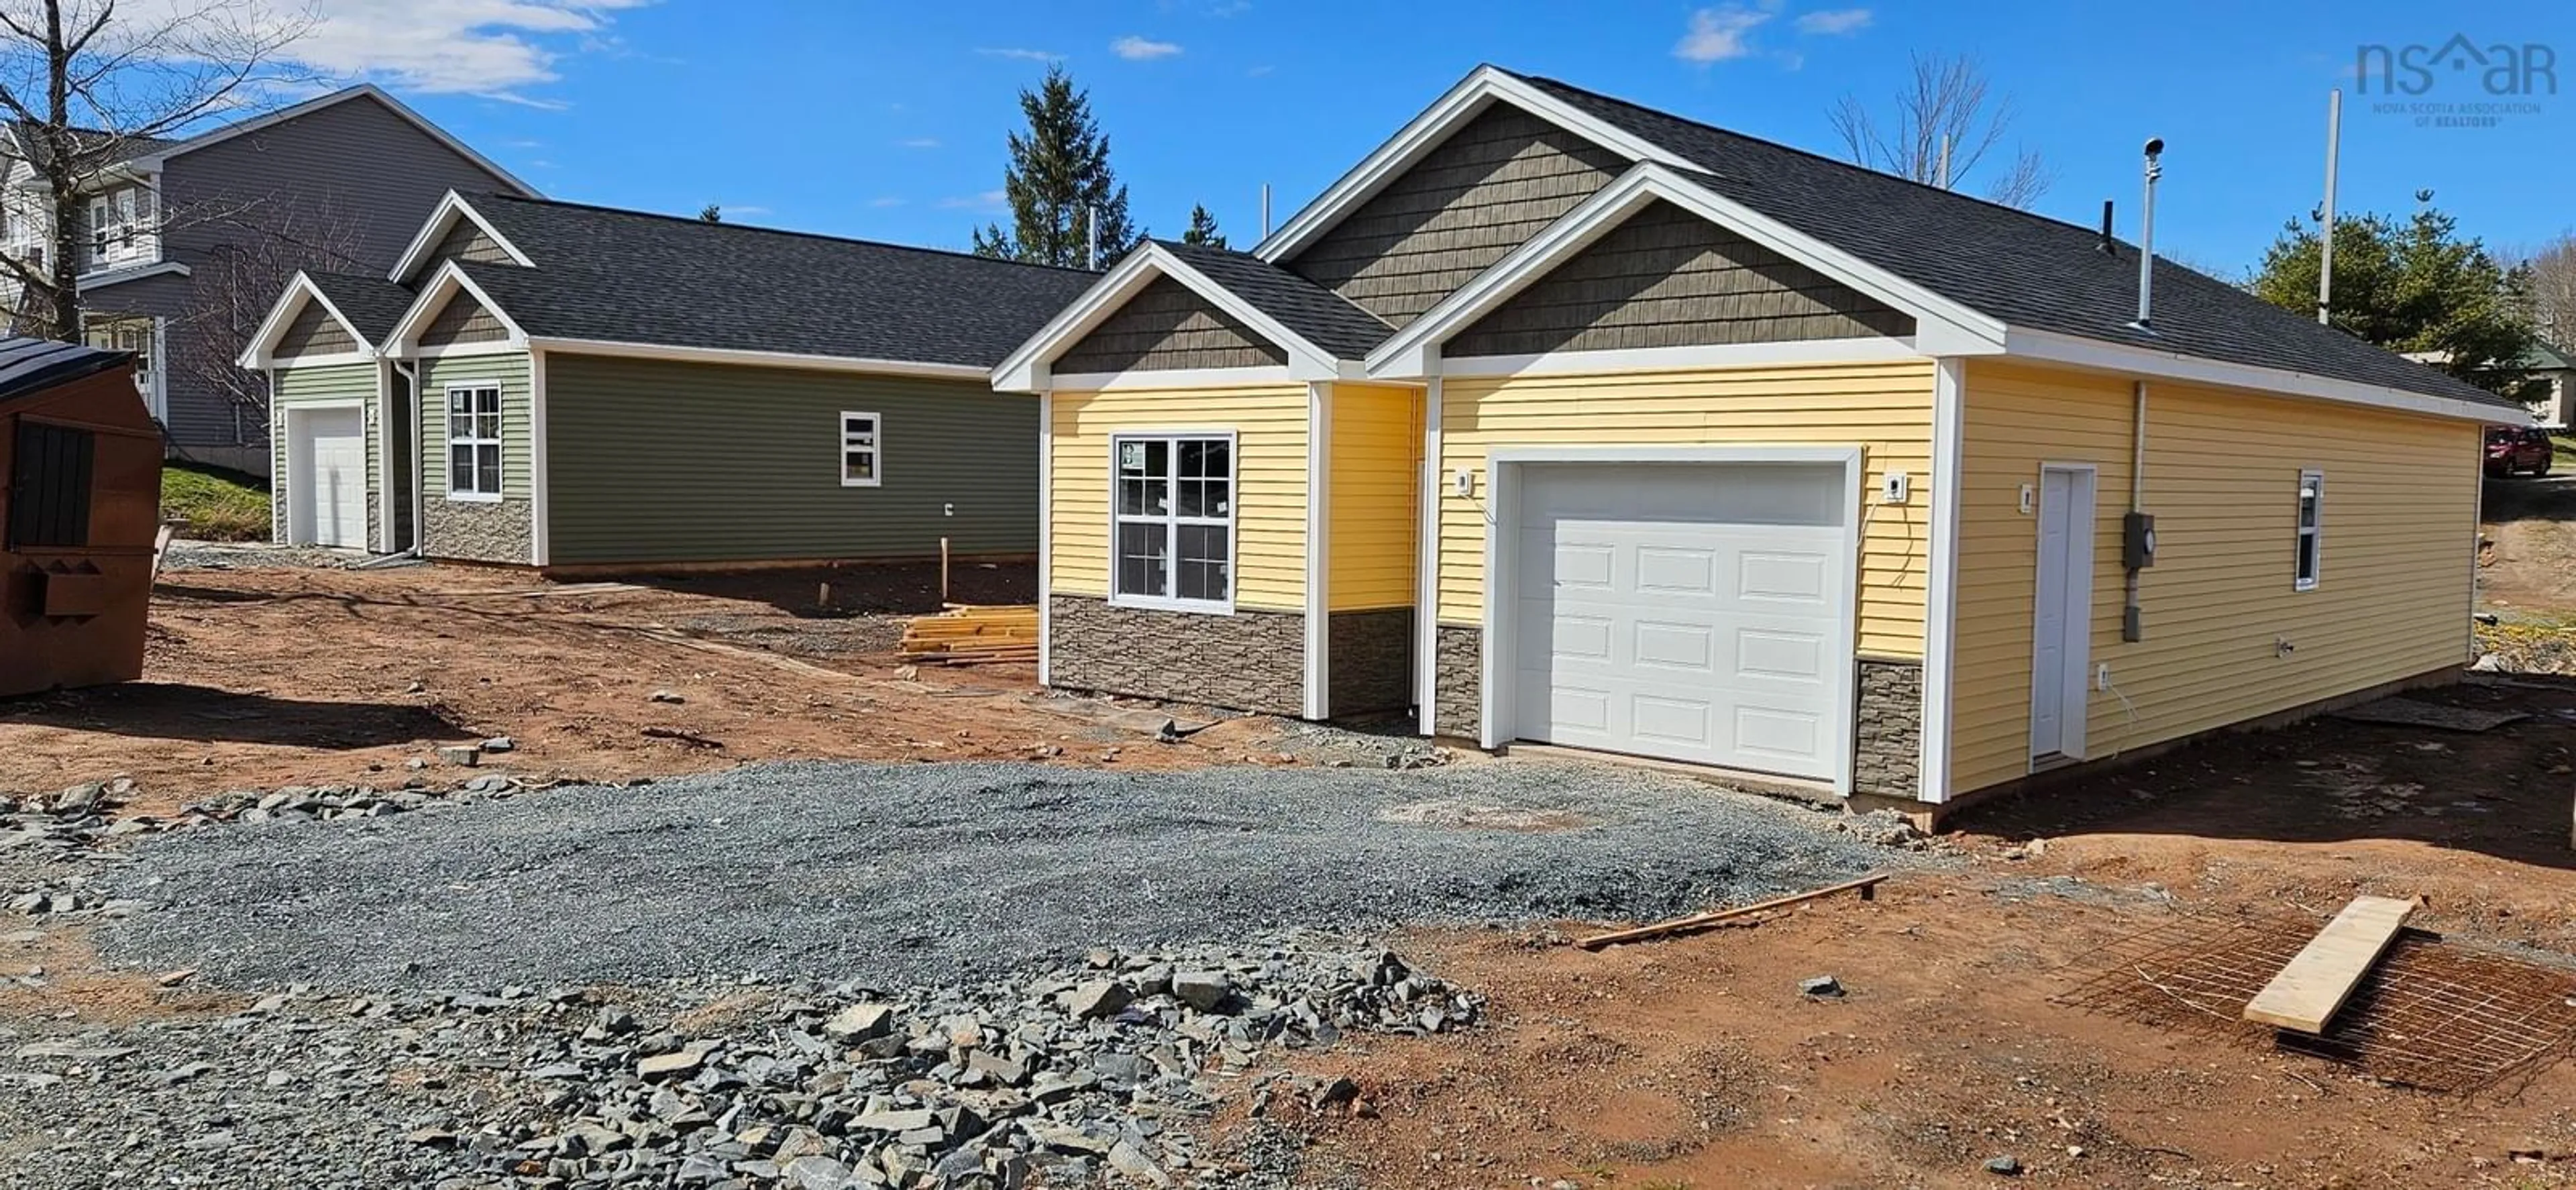 Home with vinyl exterior material for 23 Perry Cres #Lot R9, Stewiacke Nova Scotia B0N 2J0